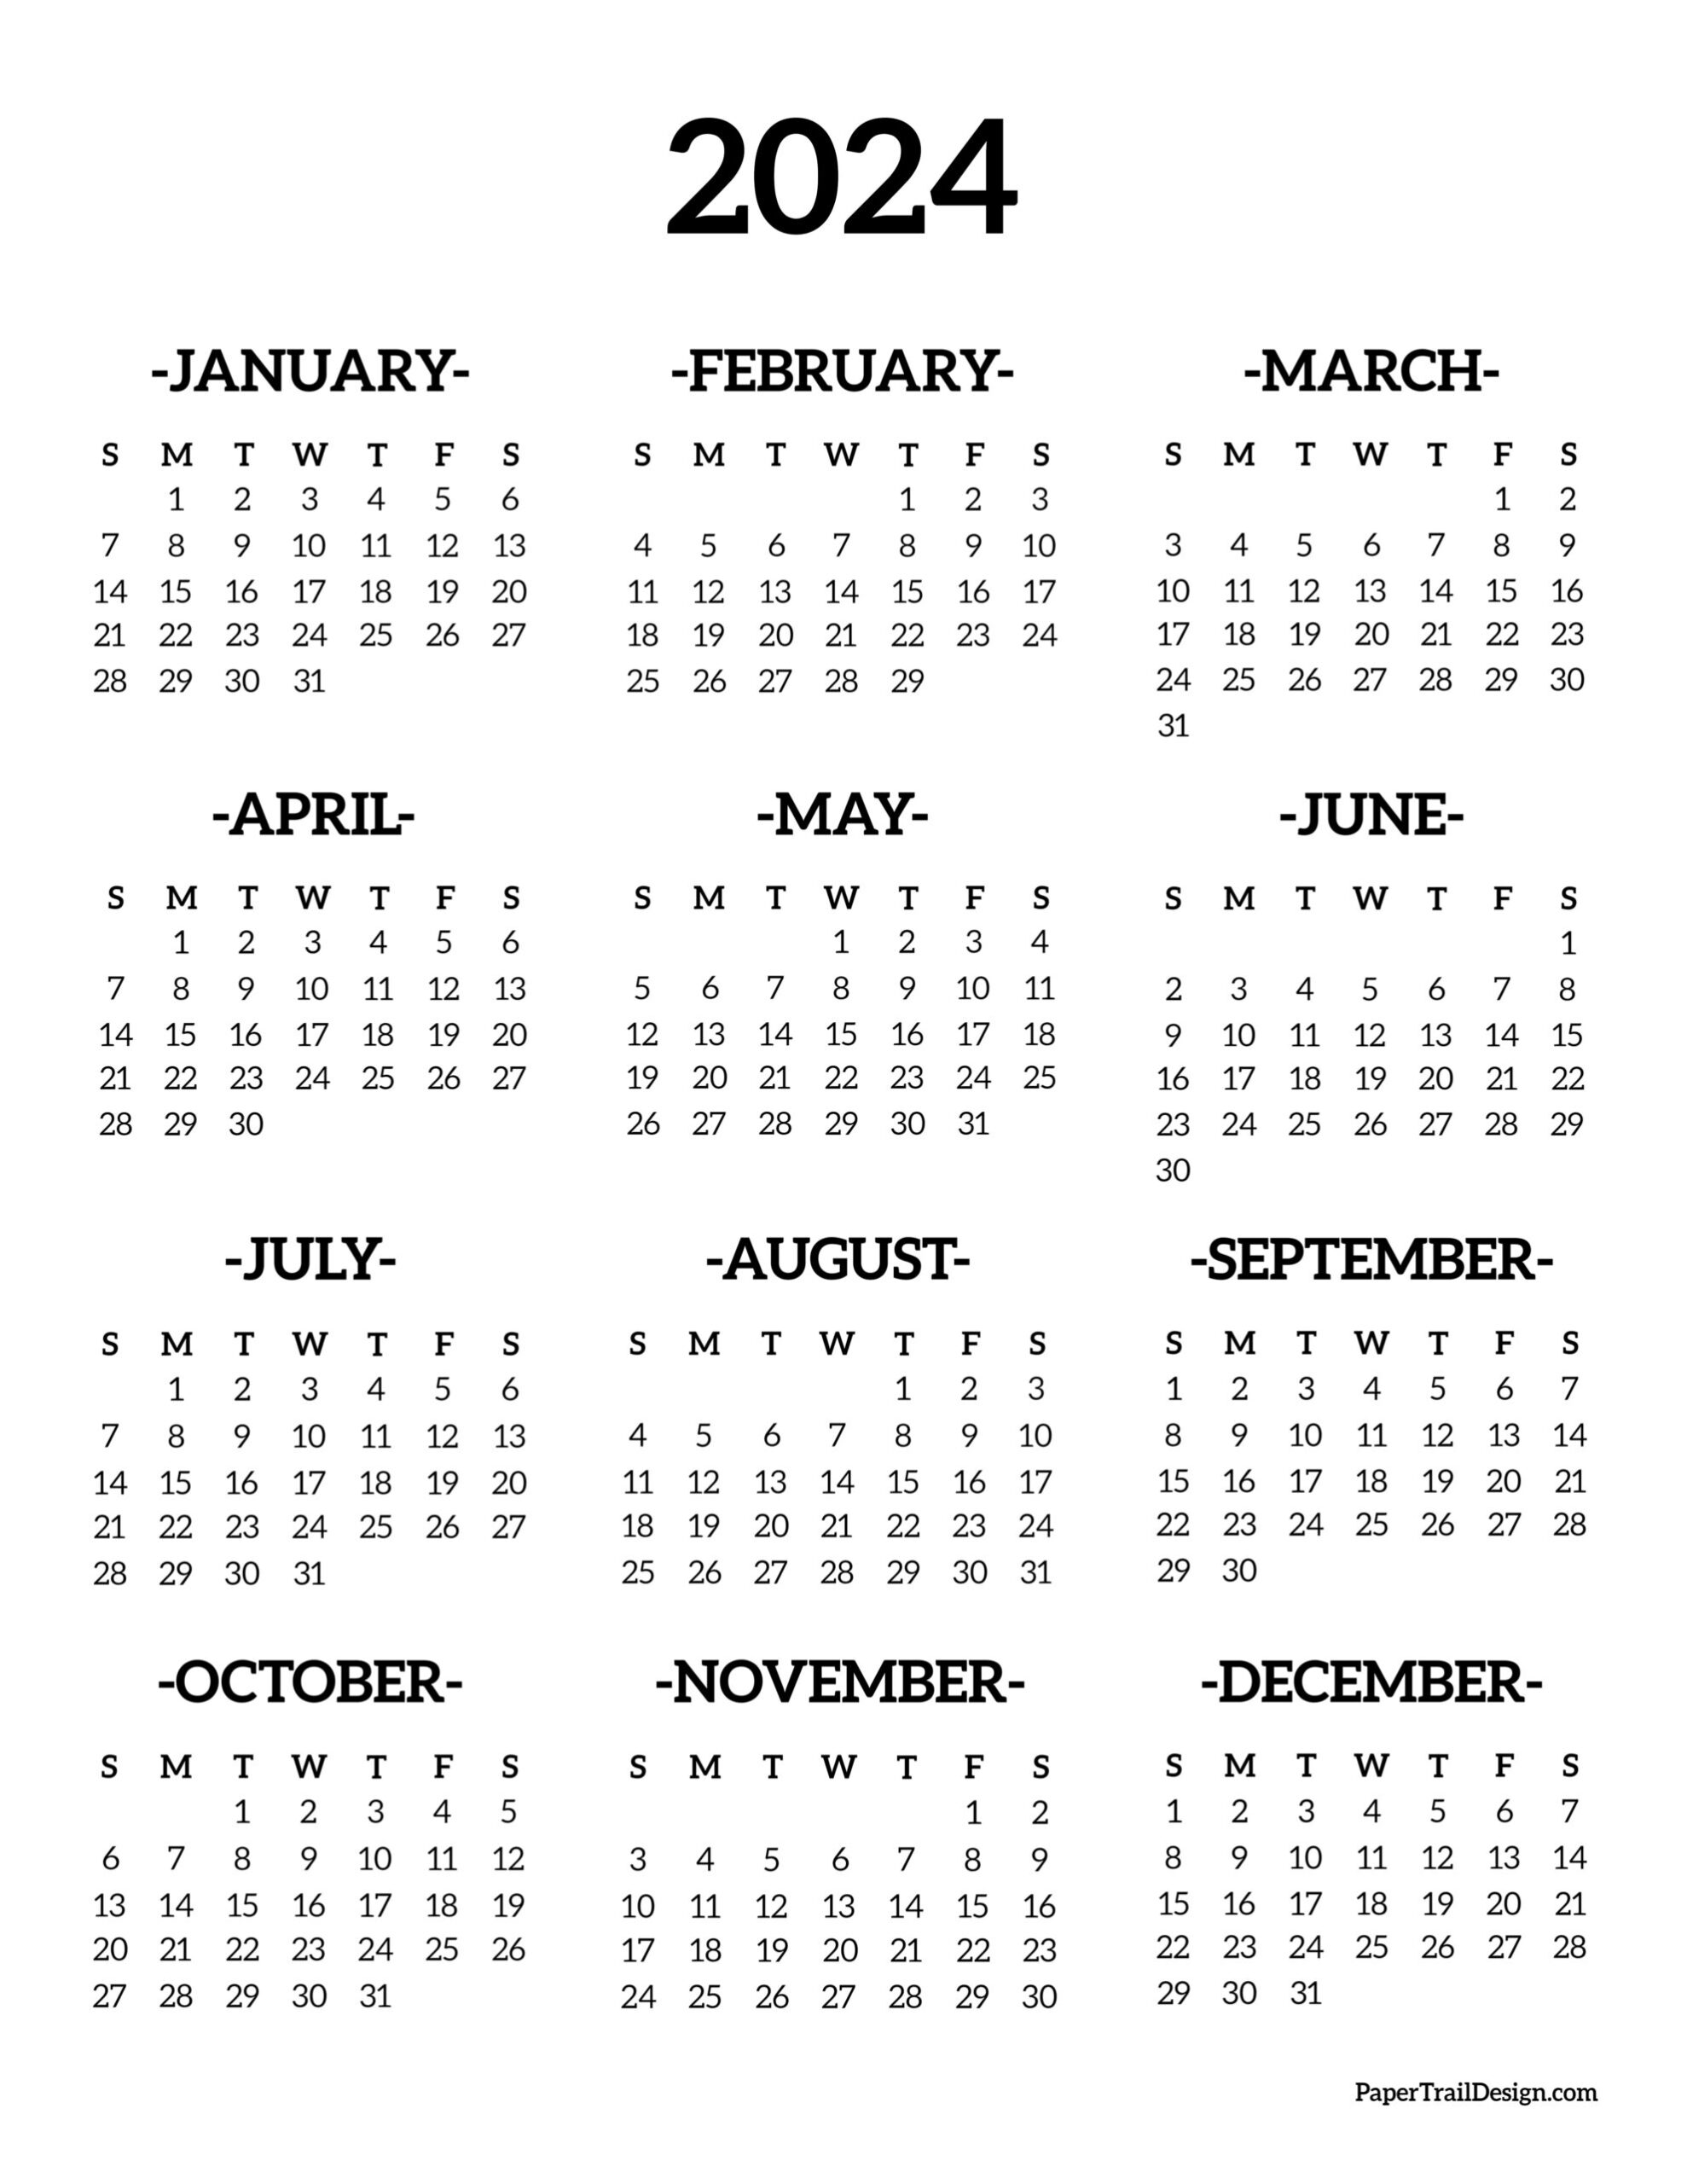 Calendar 2024 Printable One Page - Paper Trail Design for One Page Printable Calendar 2024